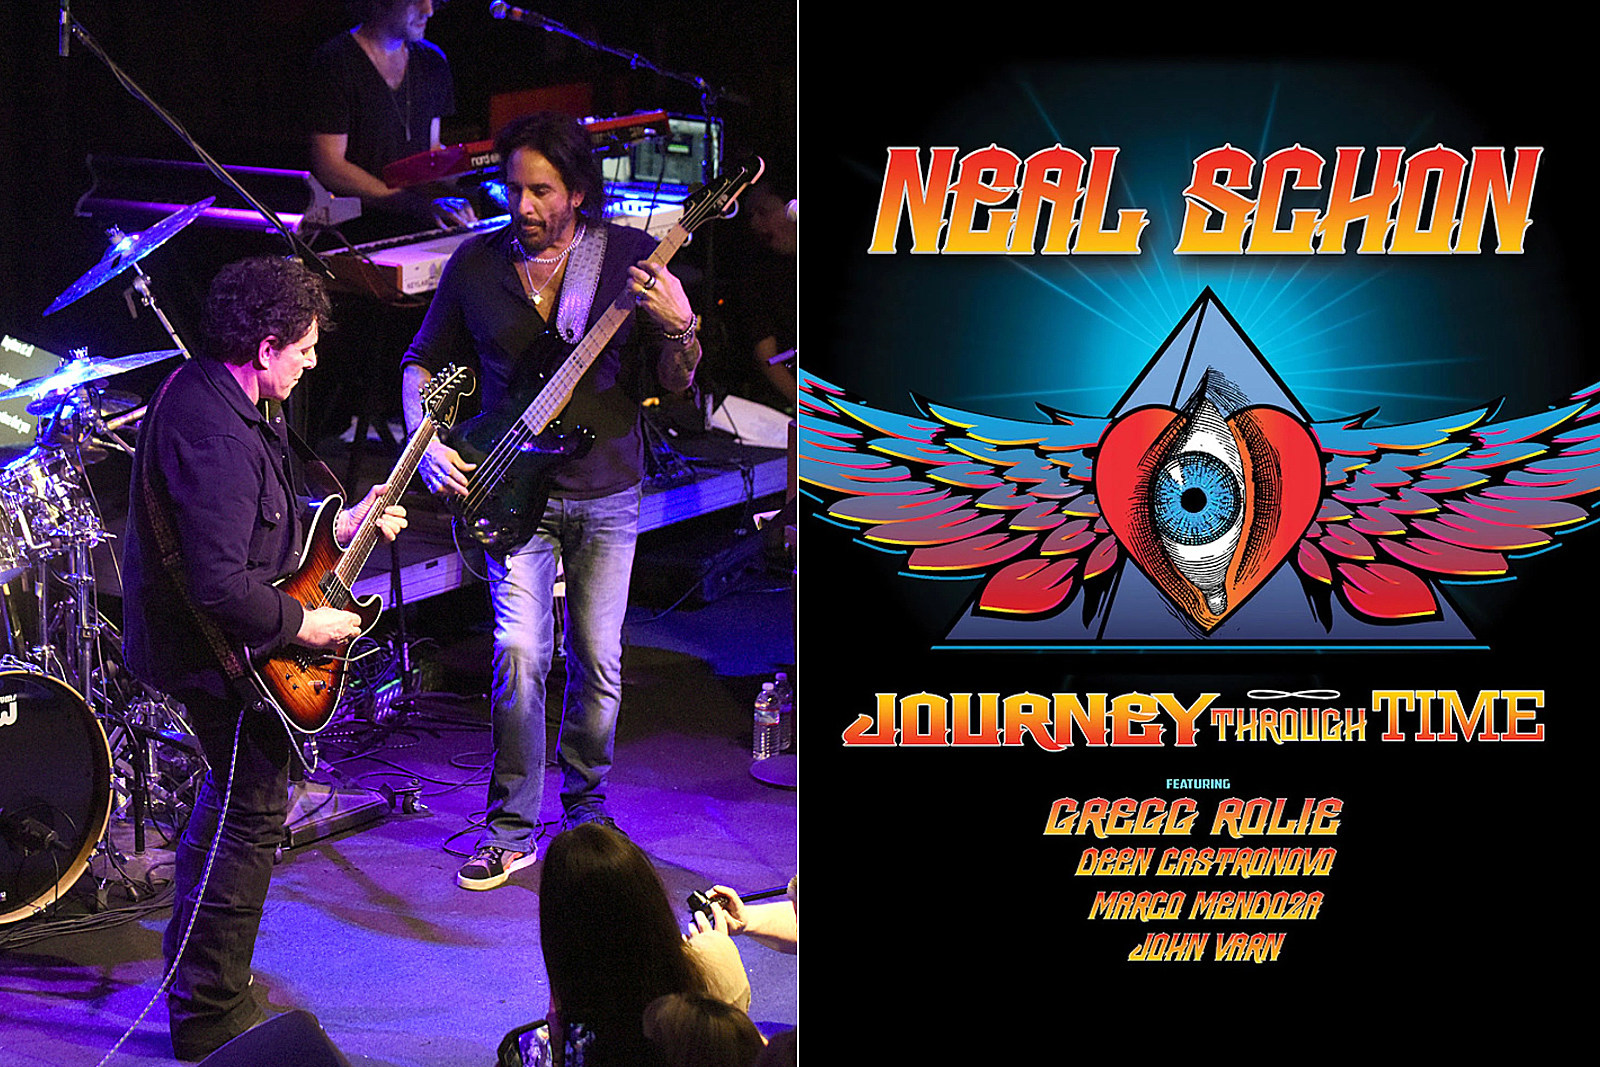 Neal Schon Announces ‘Journey Through Time’ Live Album and DVD